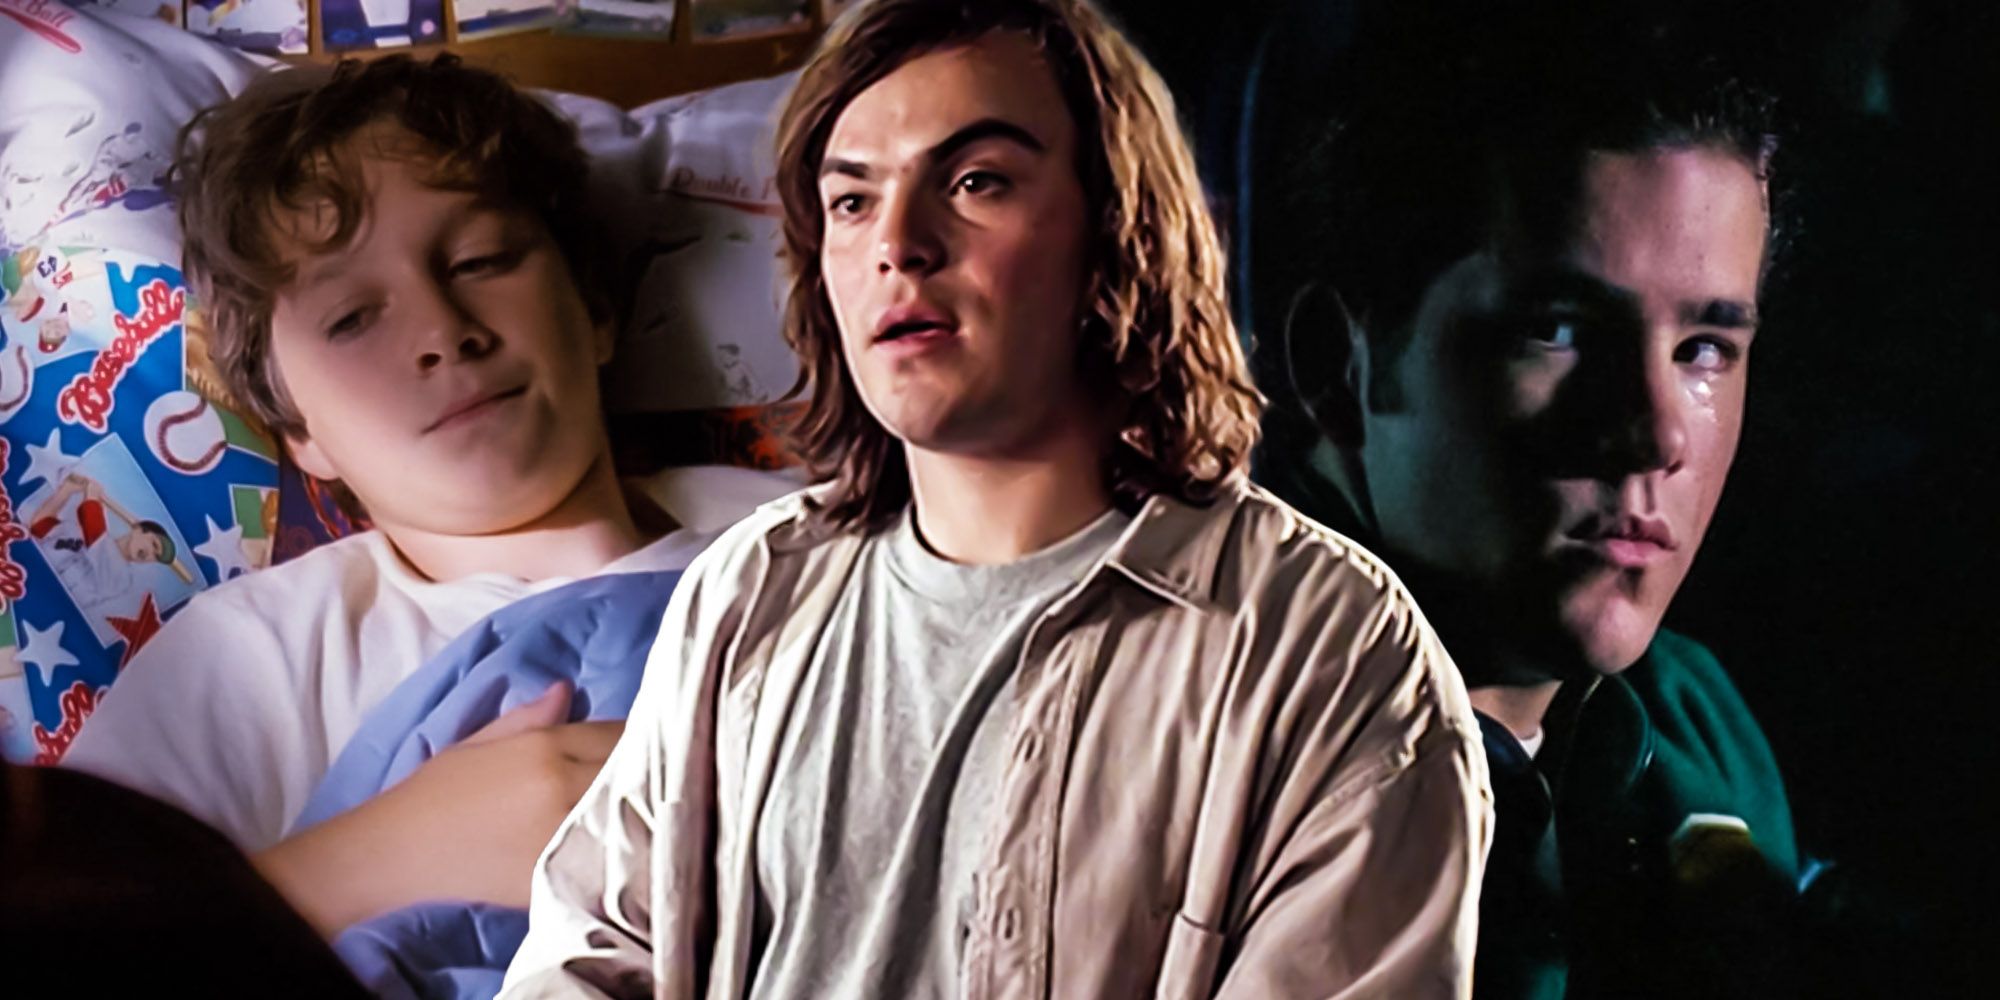 Every Guest Star Who Later Became Famous Actors X FIles ryan reynolds jack black shia labeouf